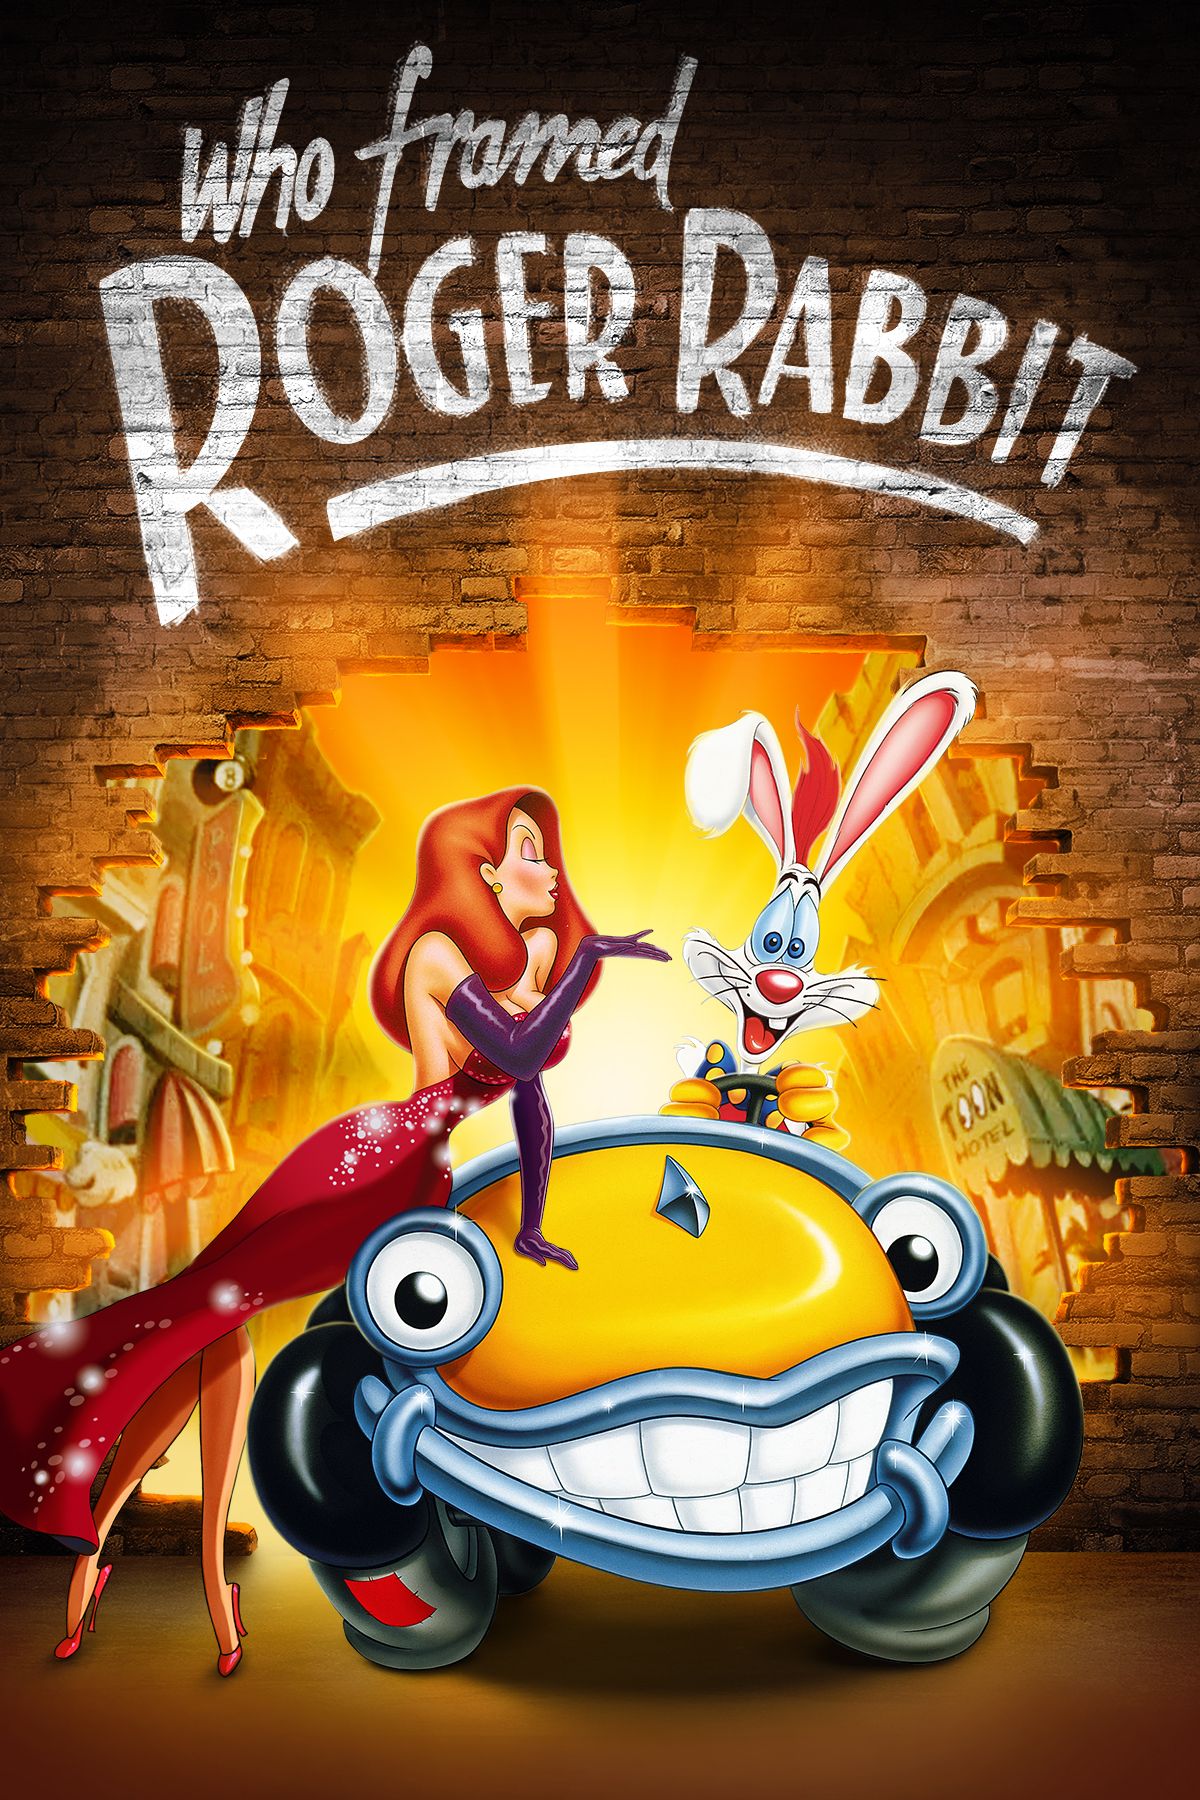 abigail lu recommends pictures of jessica rabbit and roger rabbit pic